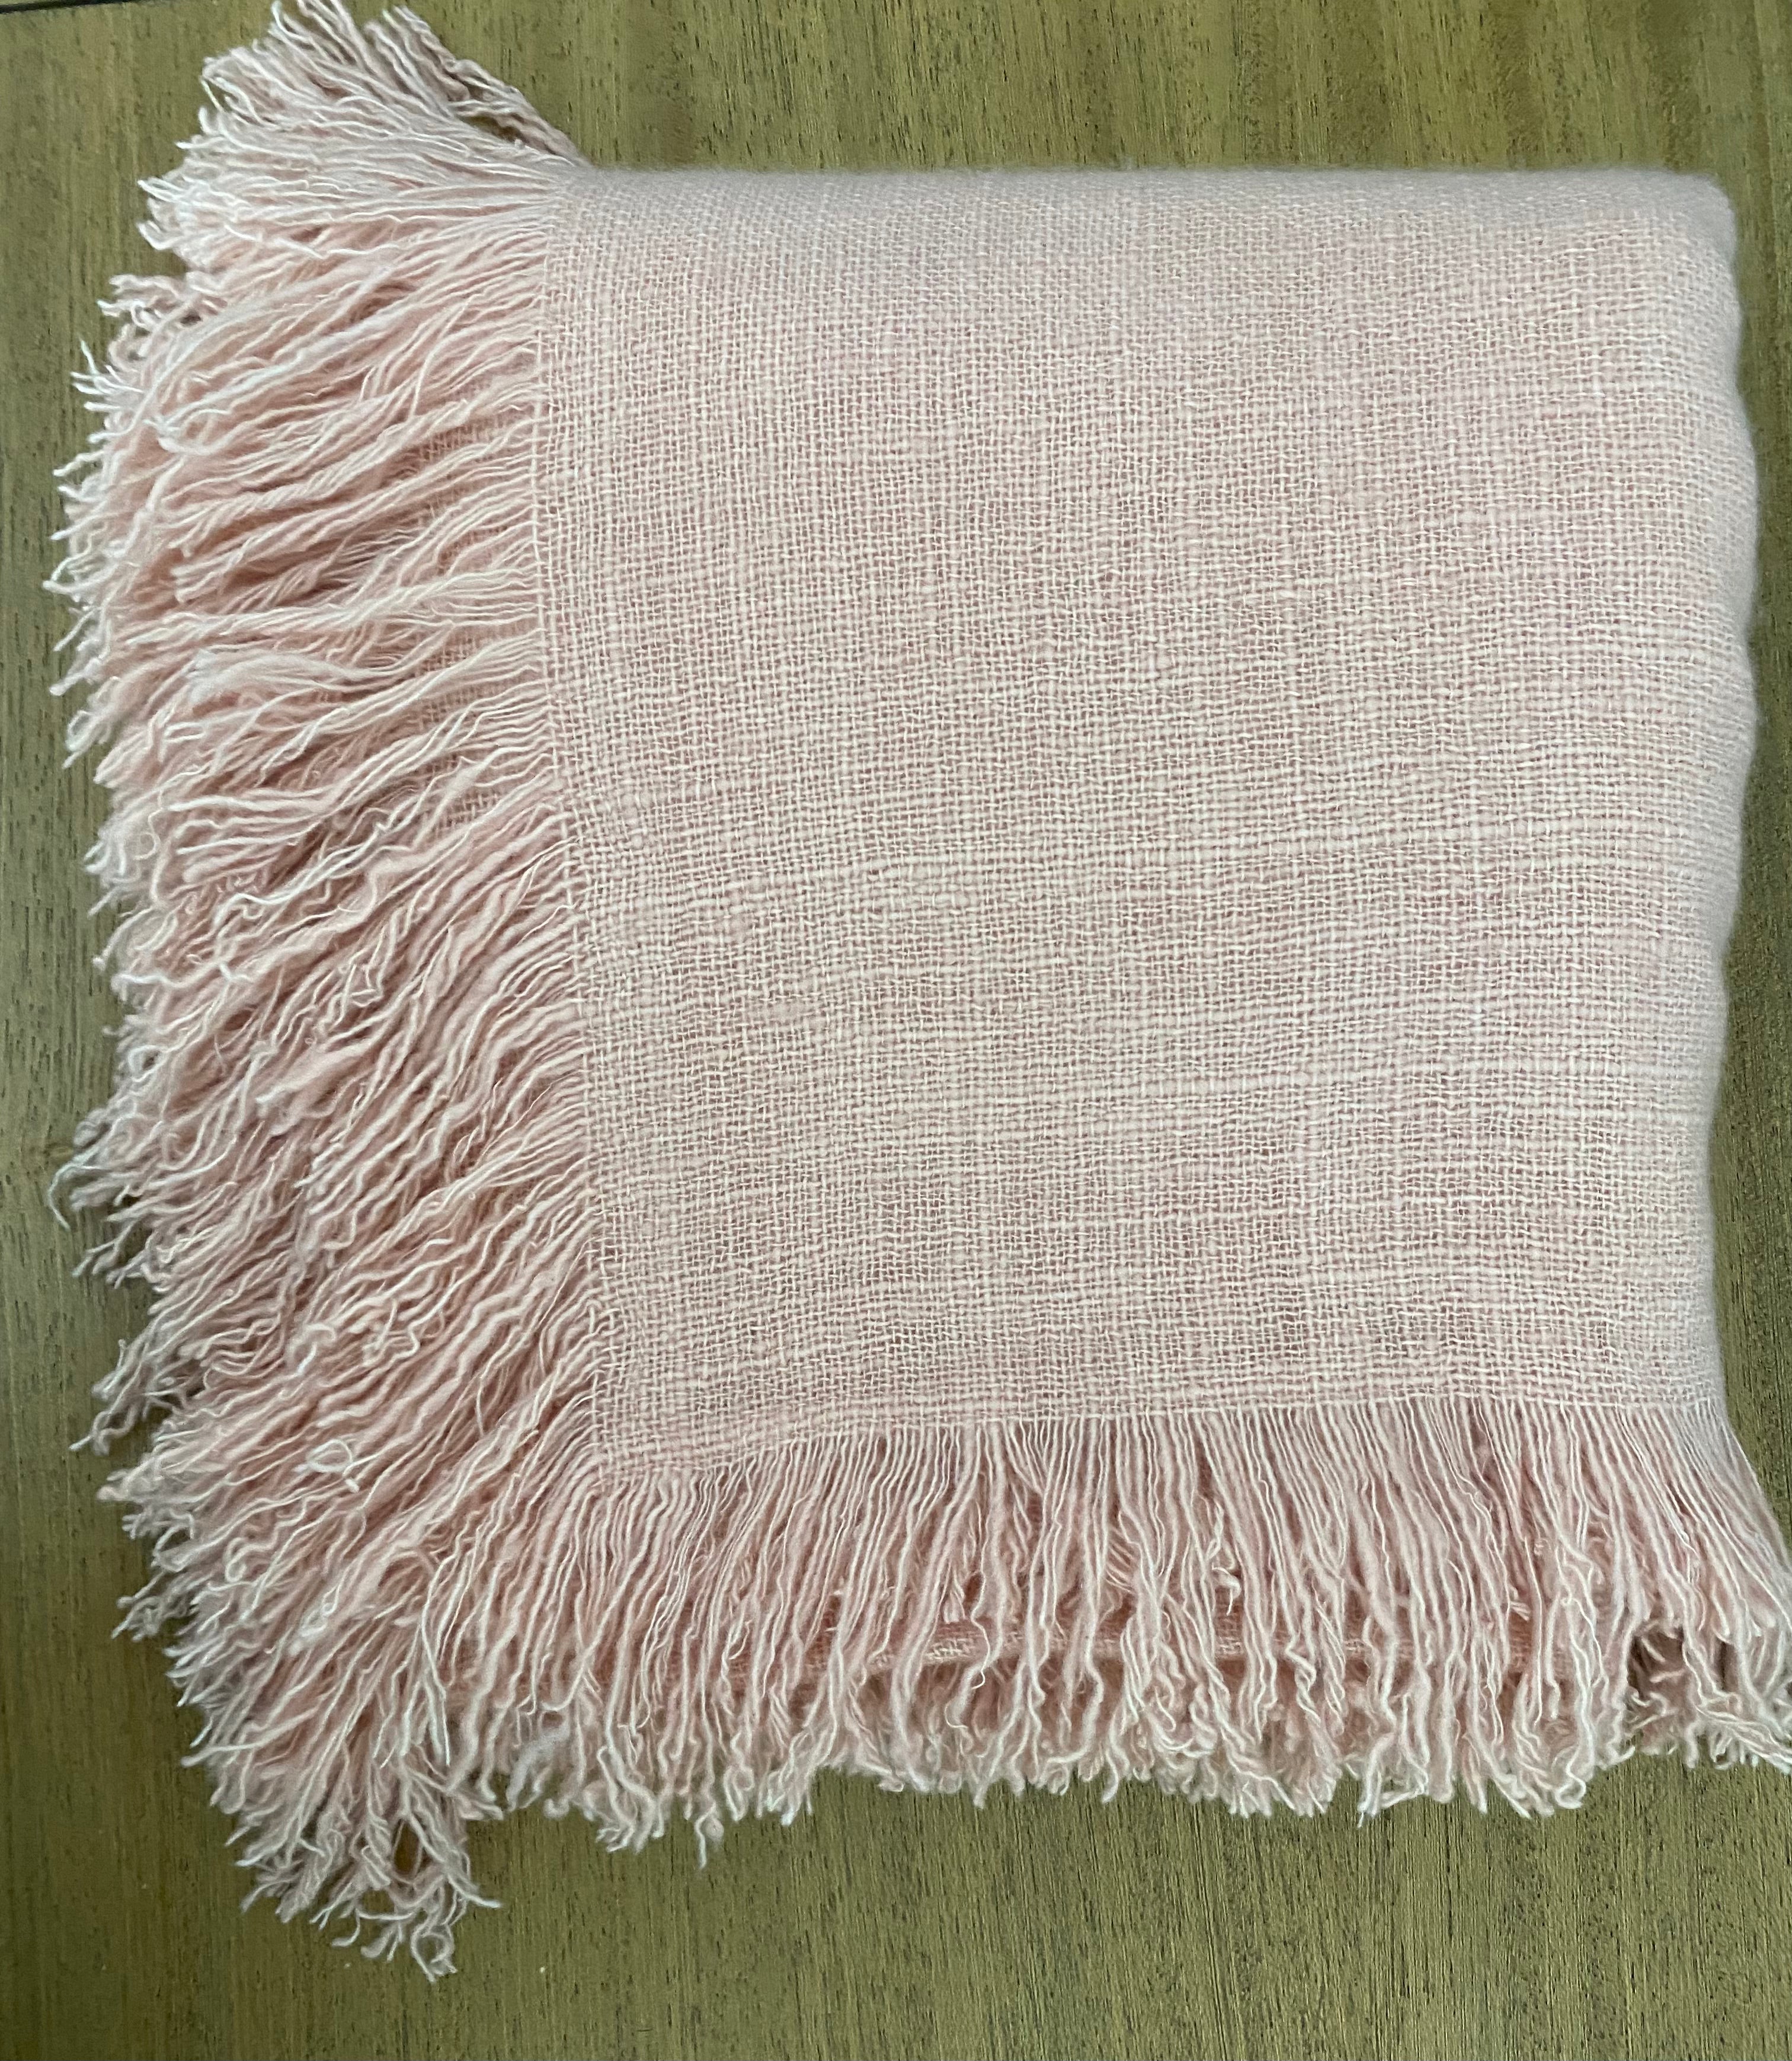 Cashmere Fringed Throw made with hand spun cashmere